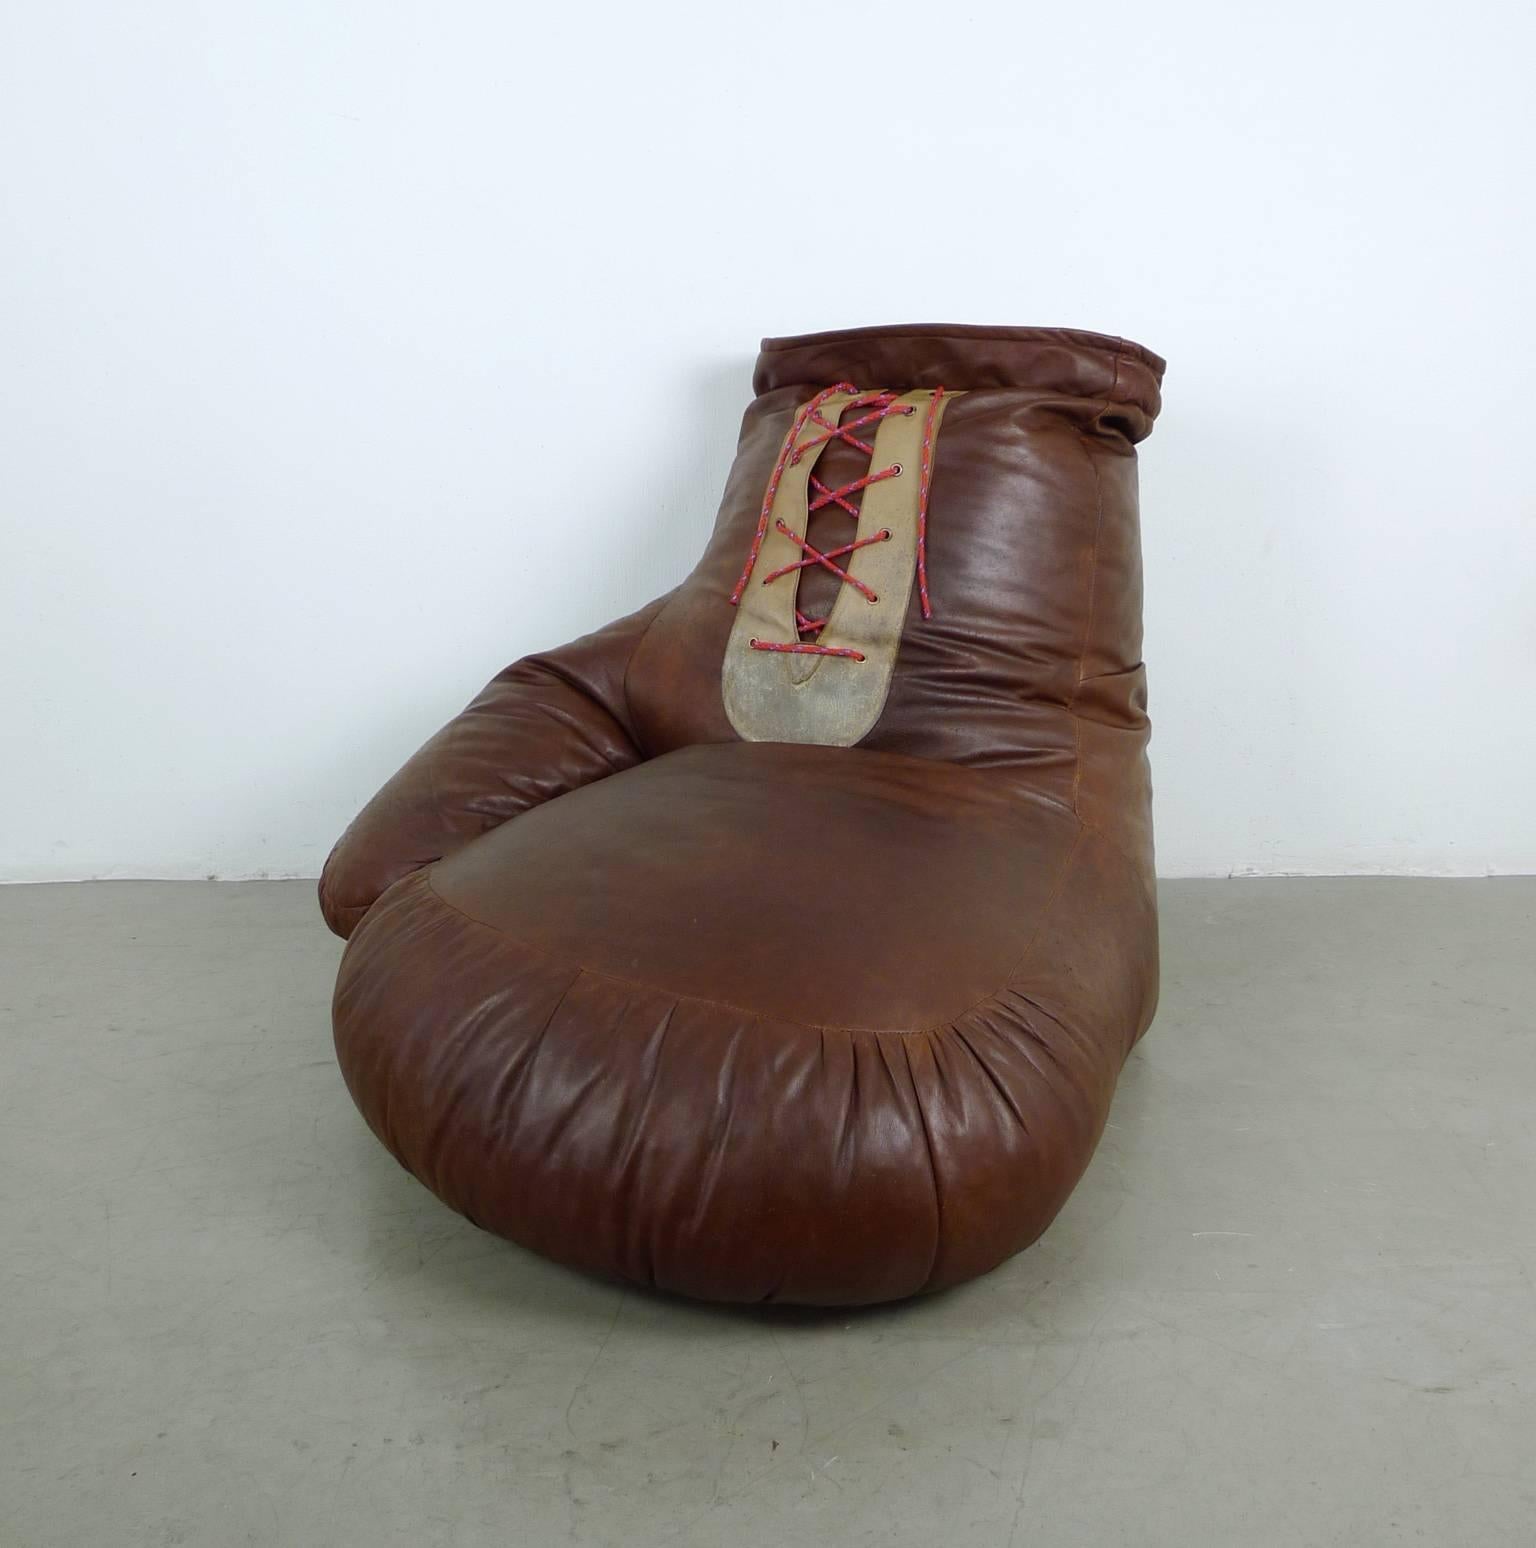 This saddle leather seat in the shape of a boxing glove was designed by Ueli bergere in the 1970s for De Sede from Switzerland. 
All seams are intact, the filling is plump and the leather is soft and supple. The leather of the cording is a little